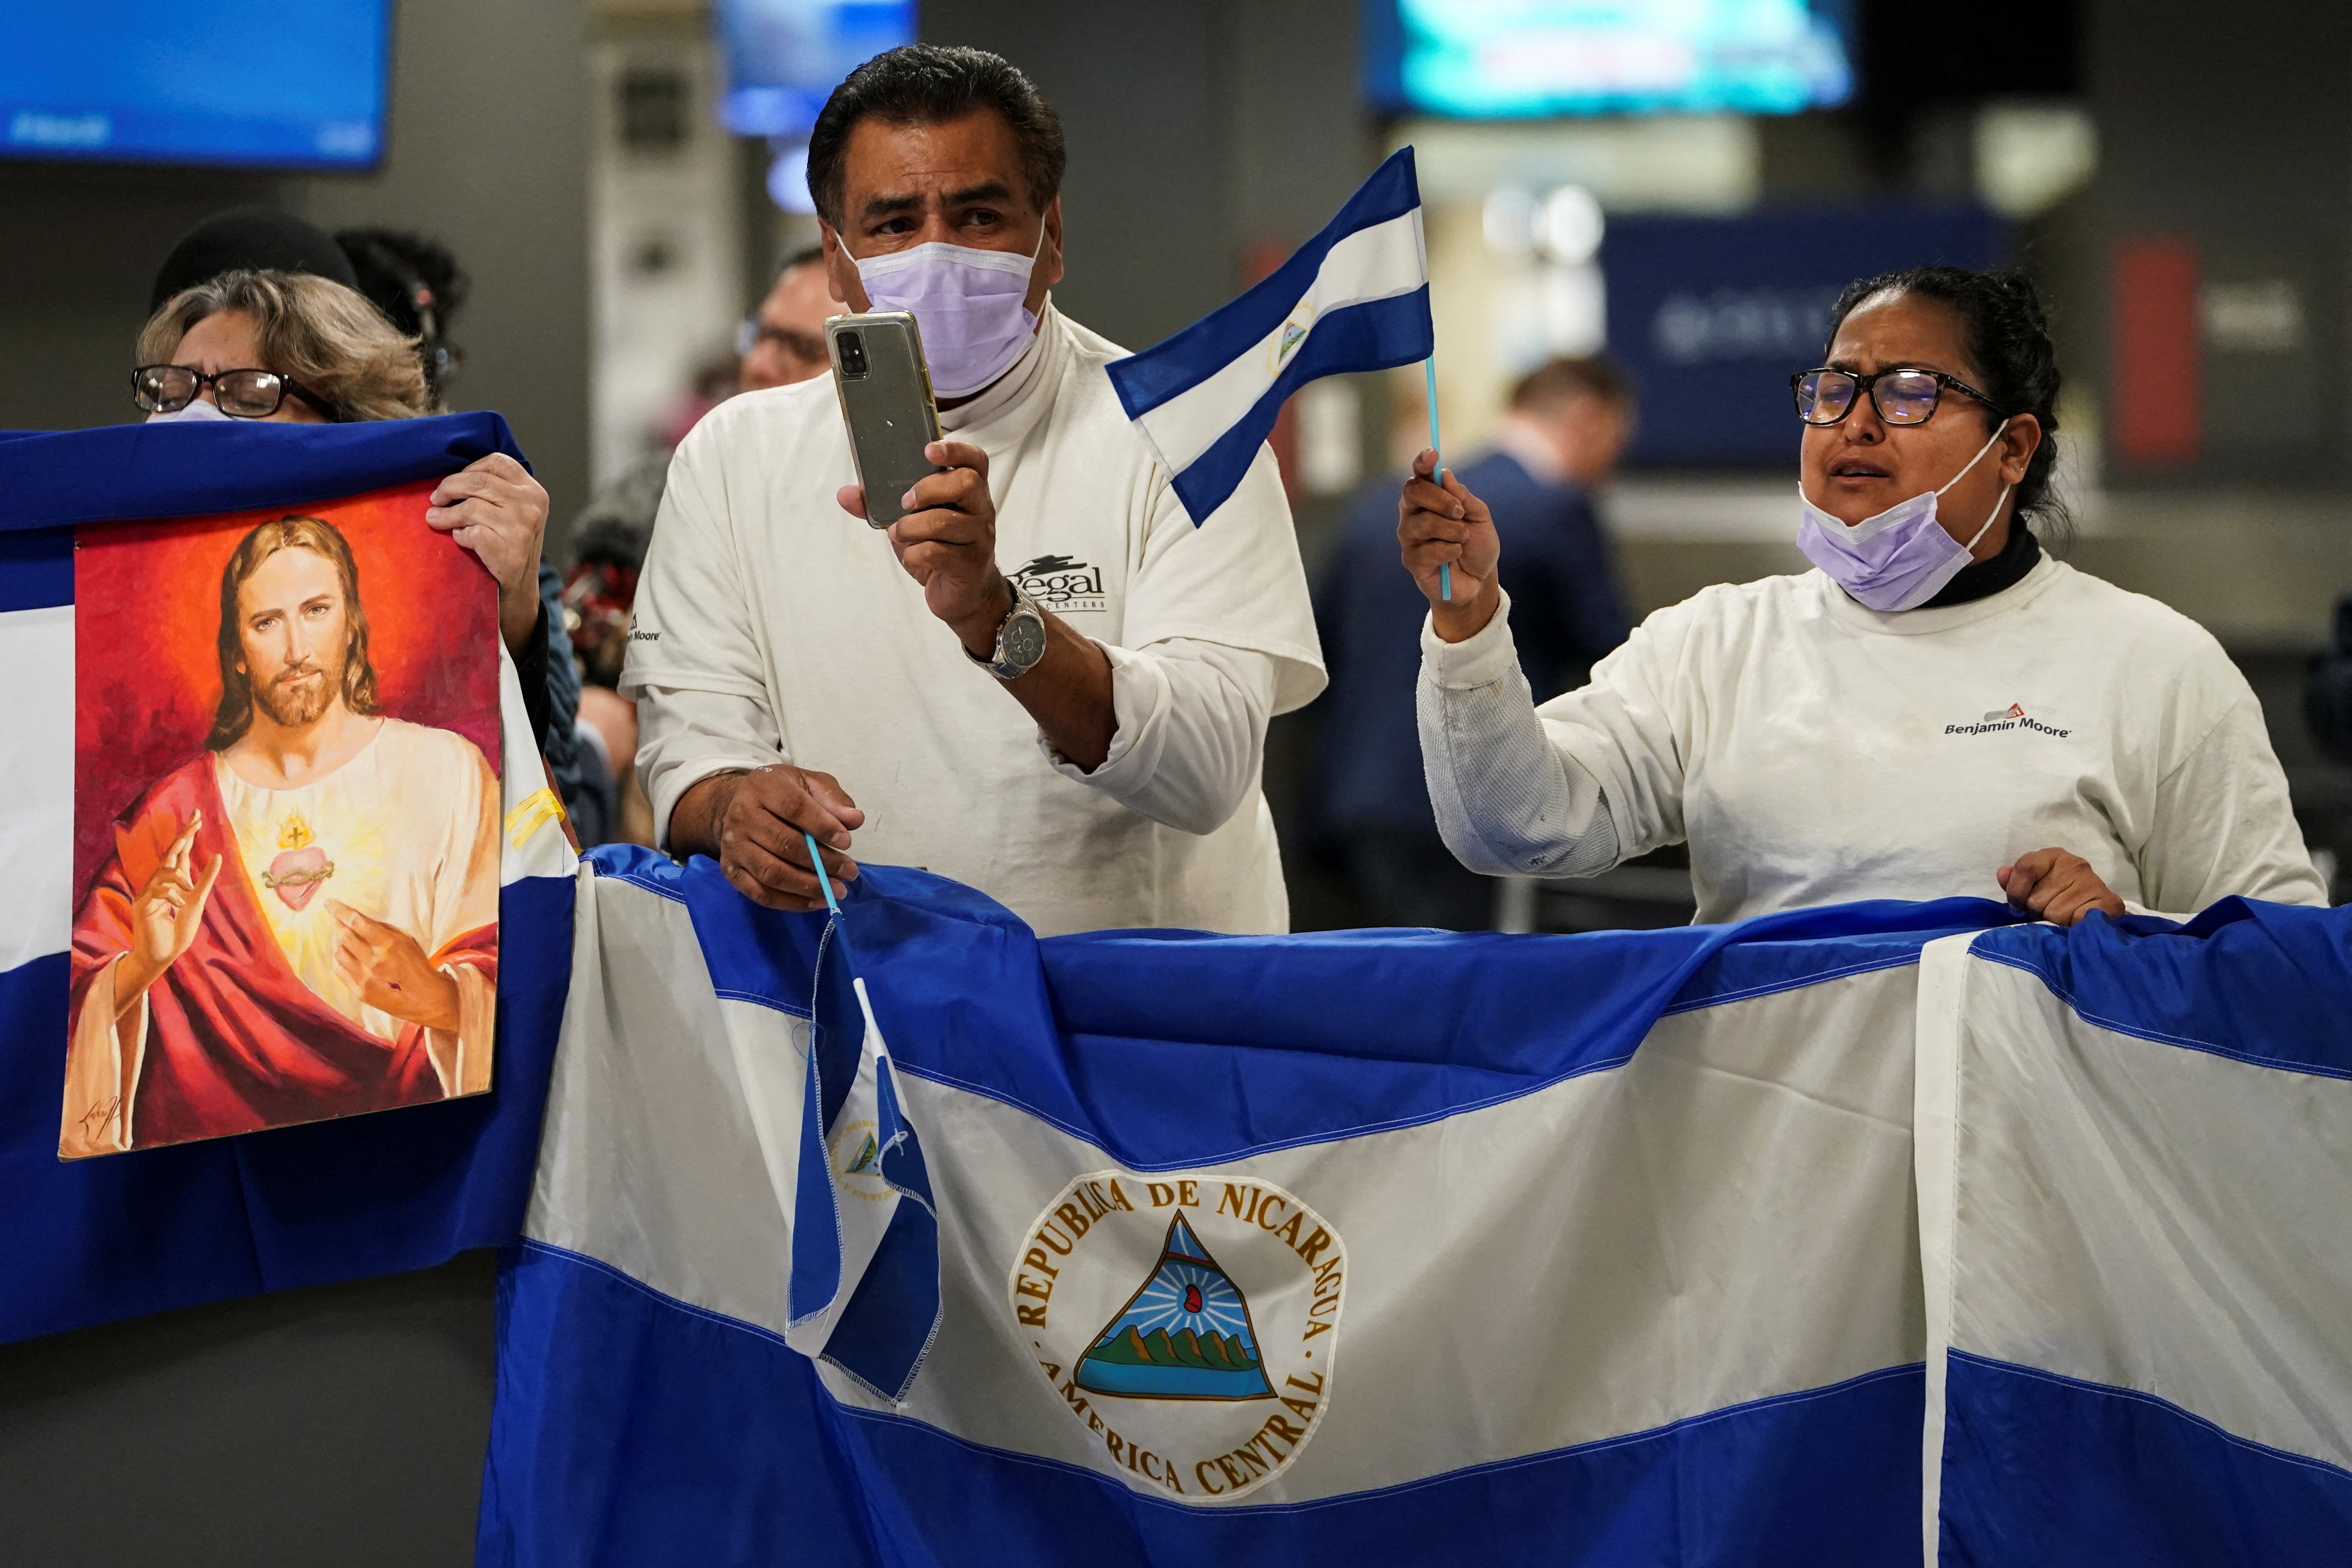 Nicaragua deports 222 dissident prisoners to US in 'unilateral' move